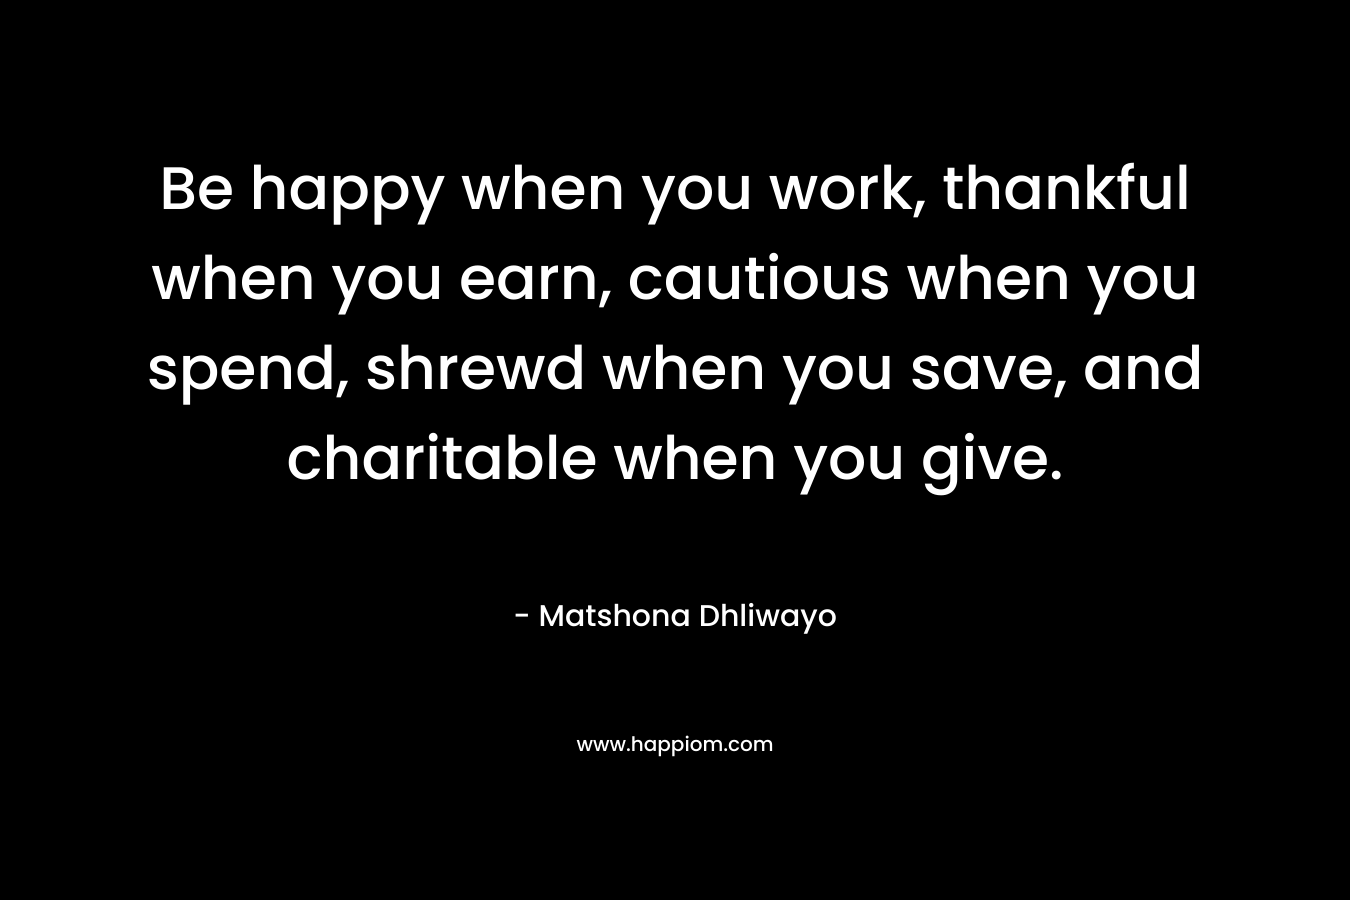 Be happy when you work, thankful when you earn, cautious when you spend, shrewd when you save, and charitable when you give. – Matshona Dhliwayo